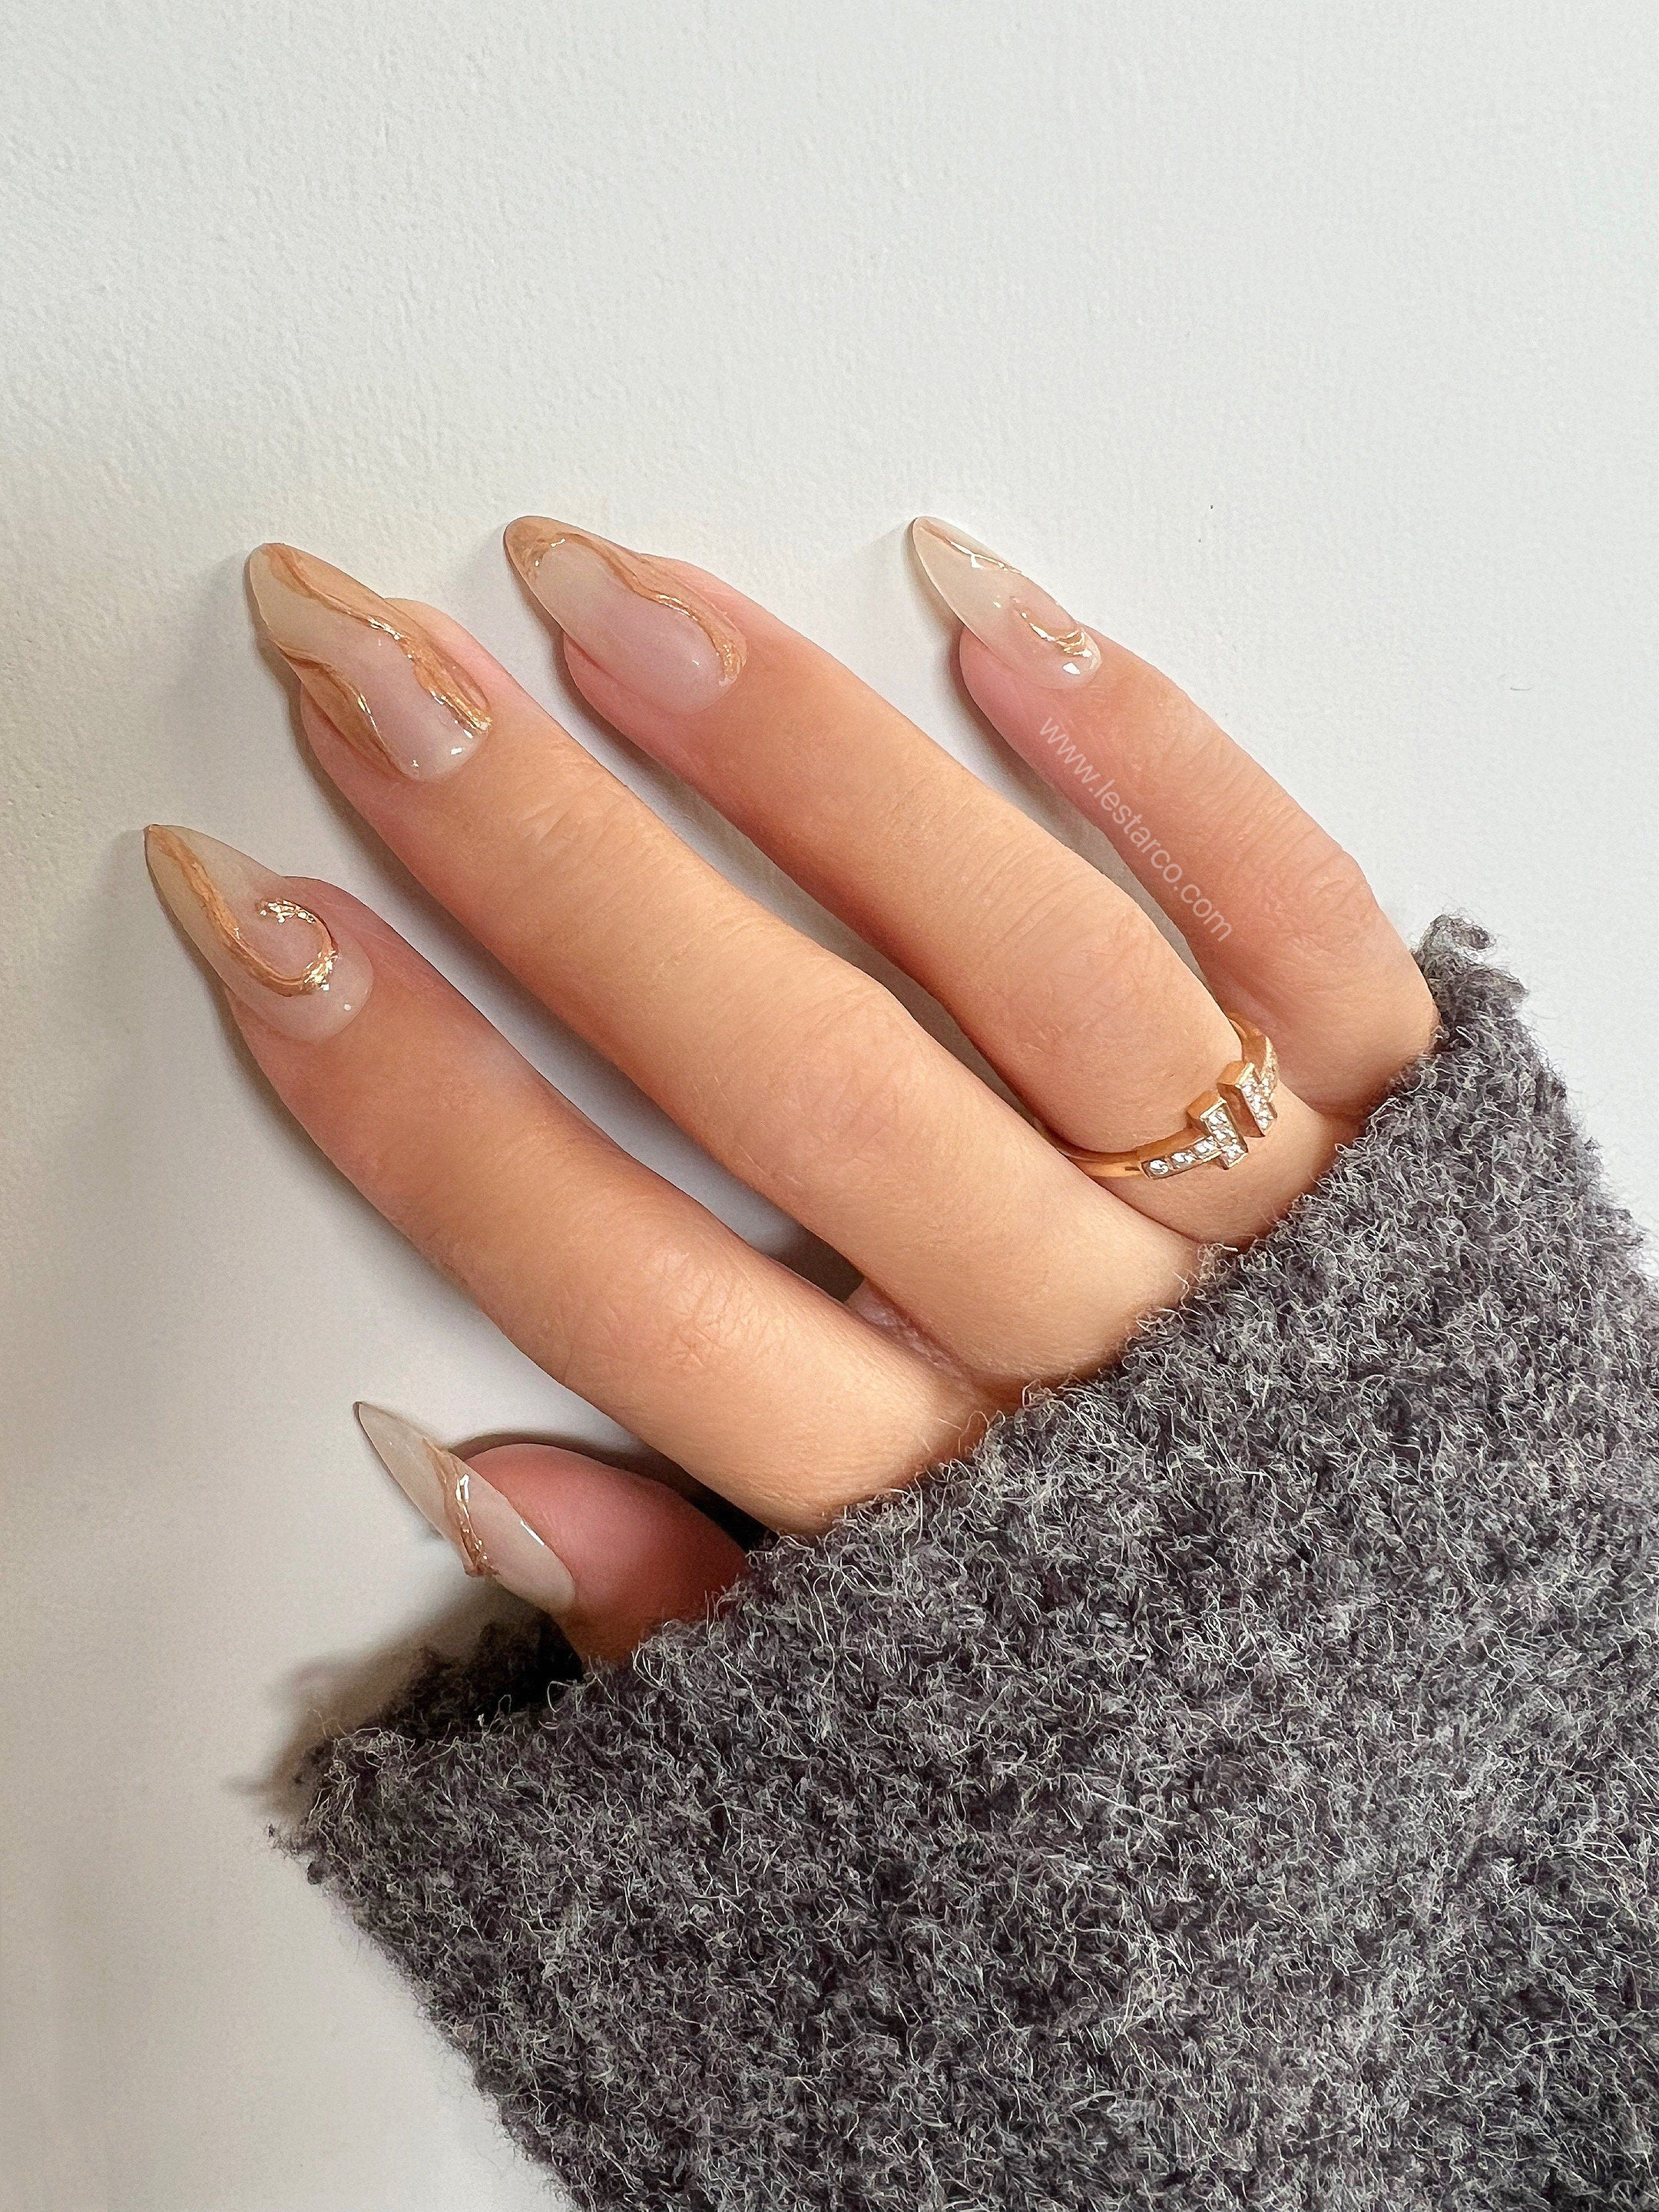 40 Awesome Nail Ideas You Should Try : Mixed Fun Almond Nails